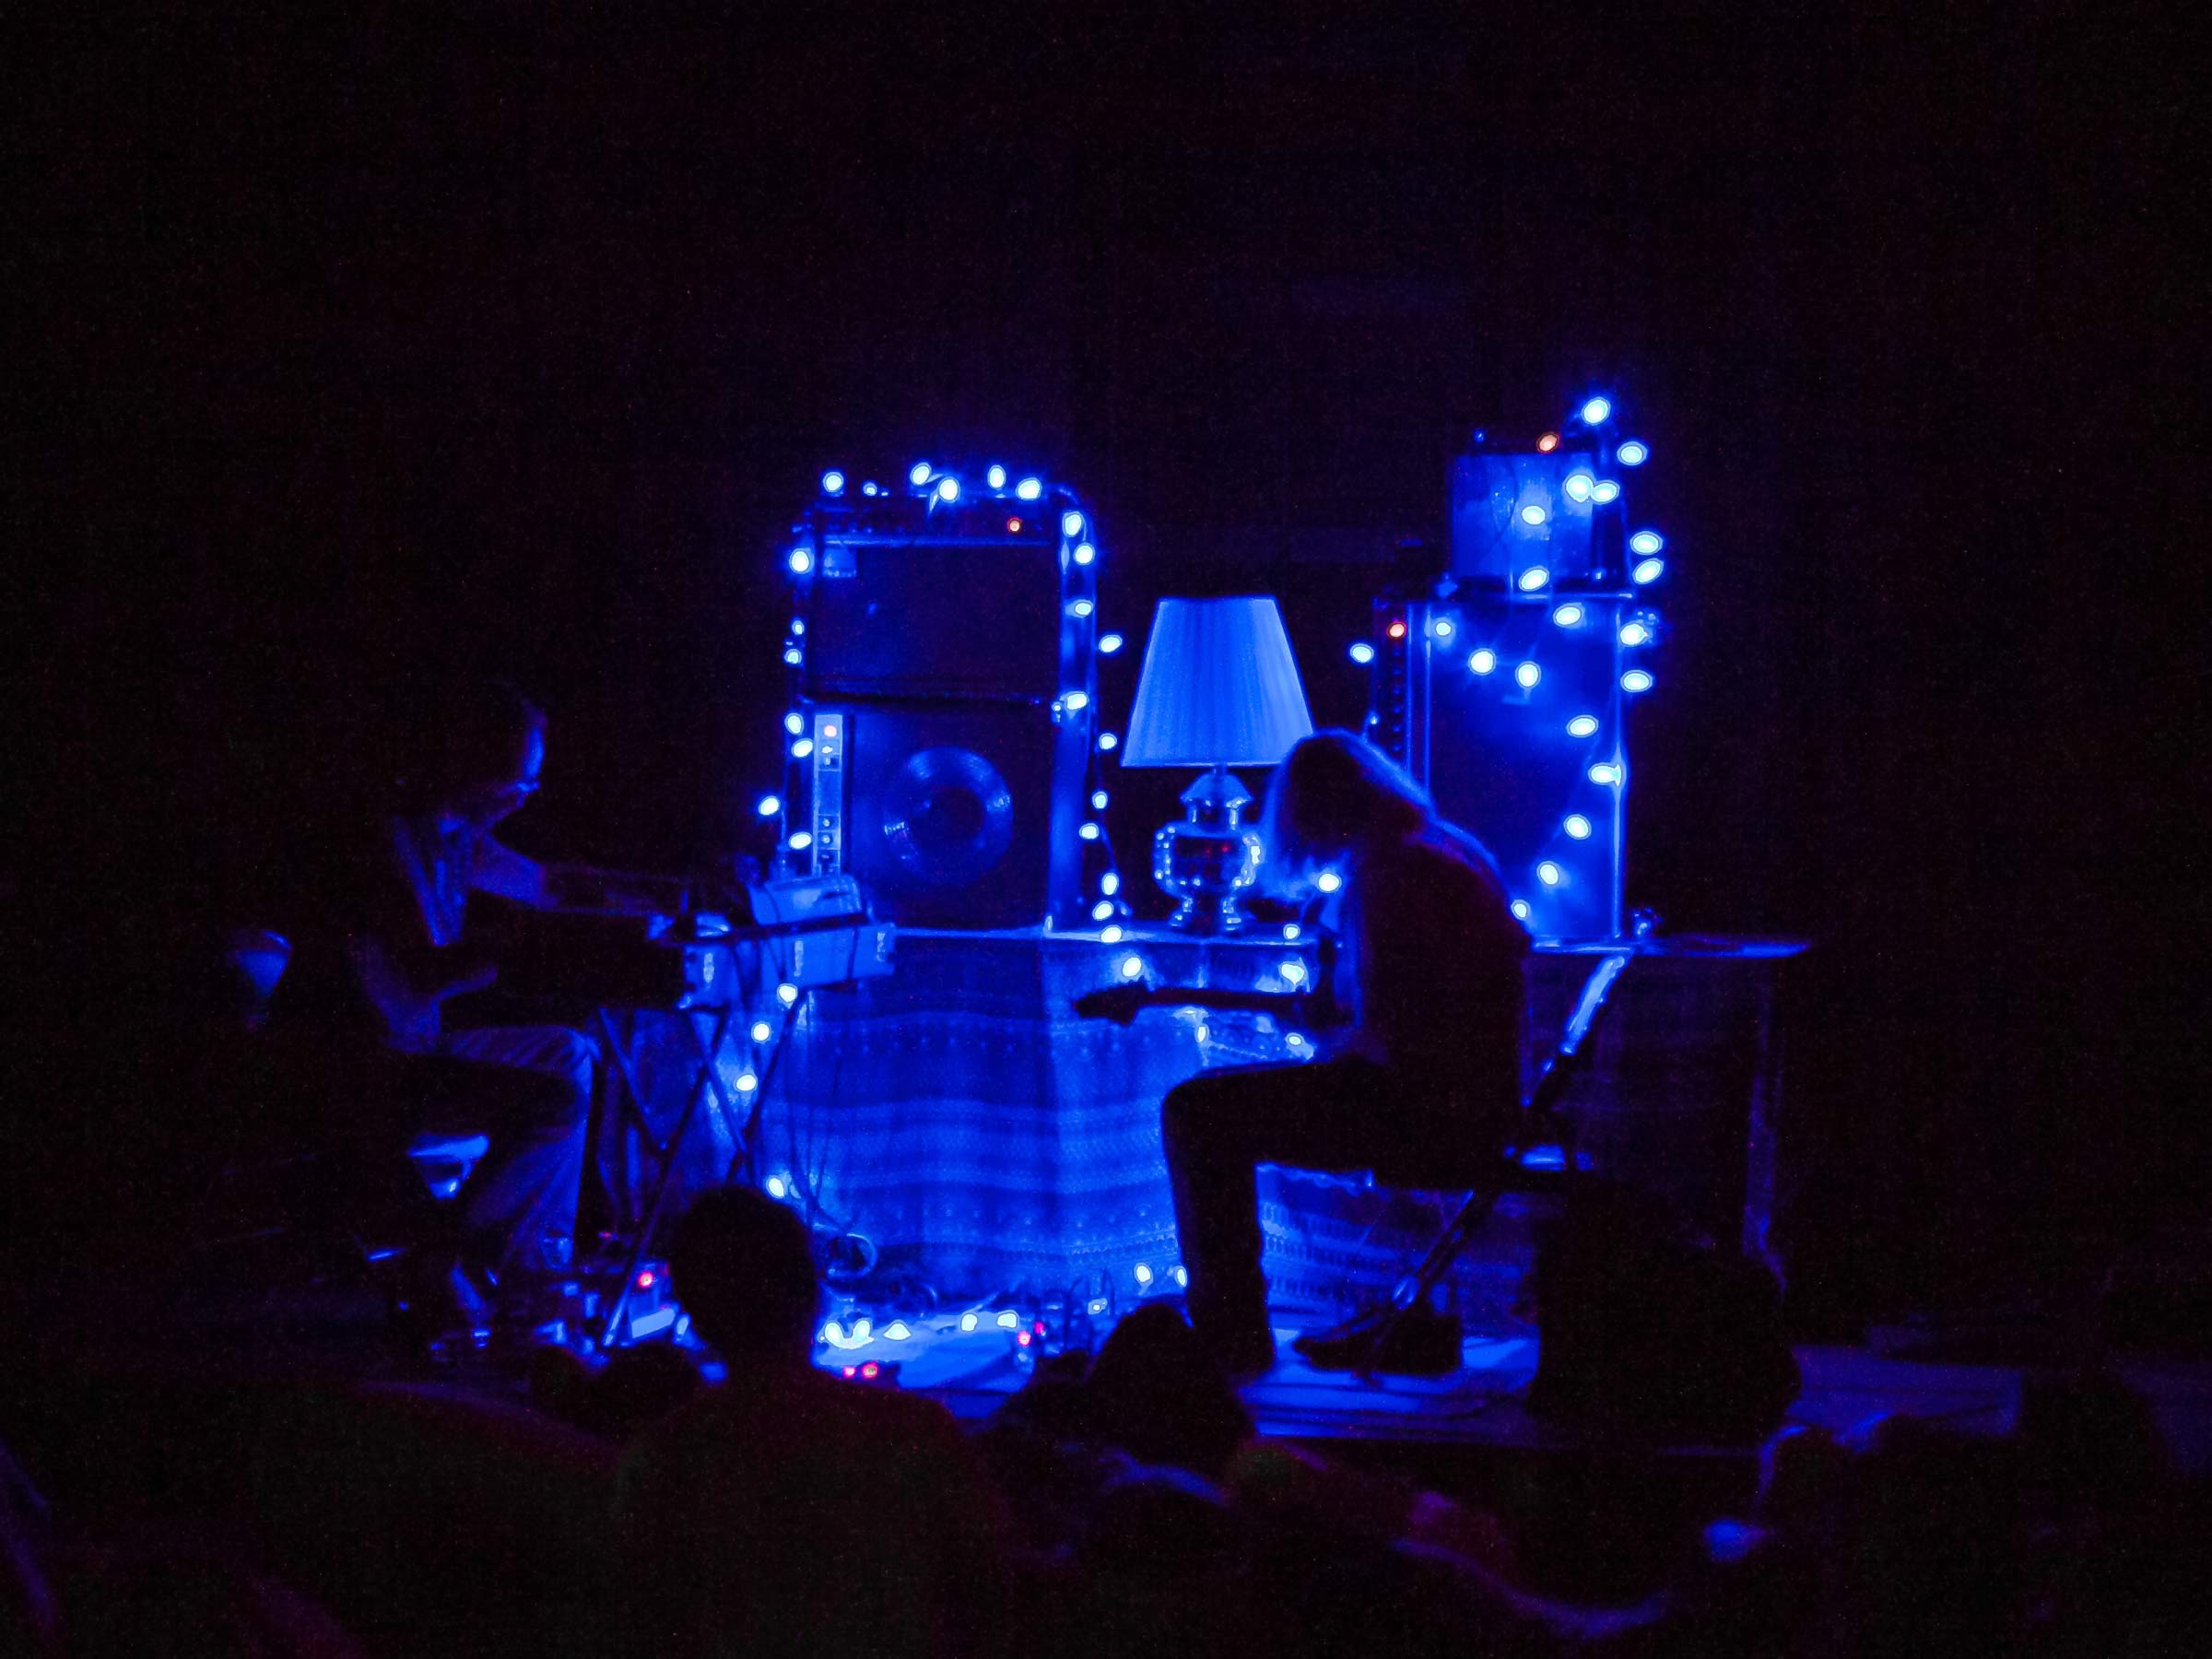 Peals performing at Artisphere, surrounded by Blue Lights